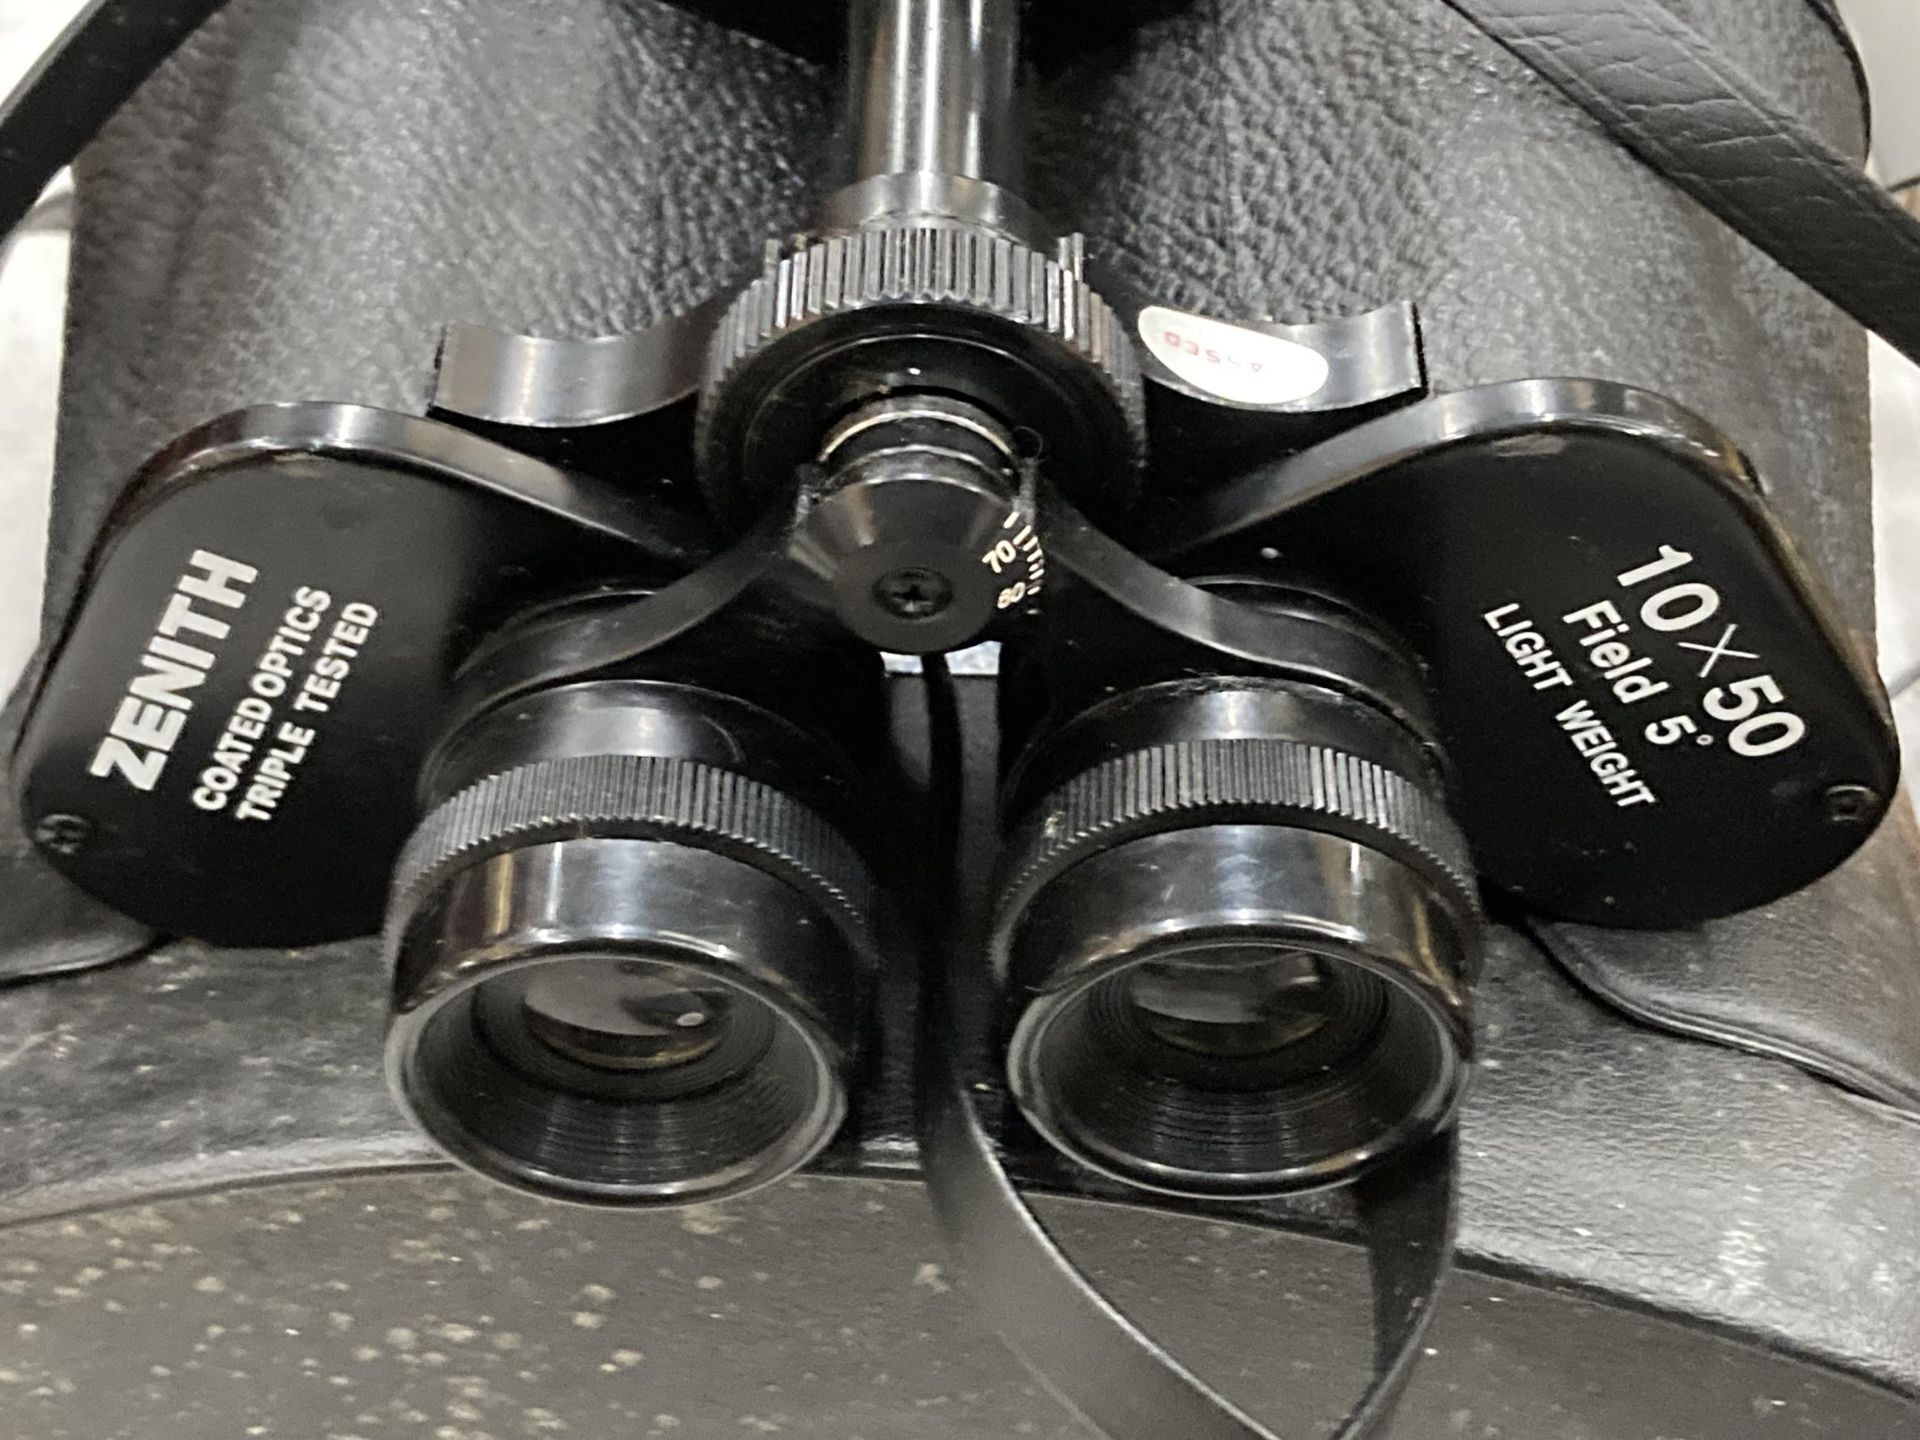 A GROUP OF BINOCULARS TO INCLUDE KERSHAM BINO PRISM NO.2 MK II AND ZENITH EXAMPLES - Image 5 of 5